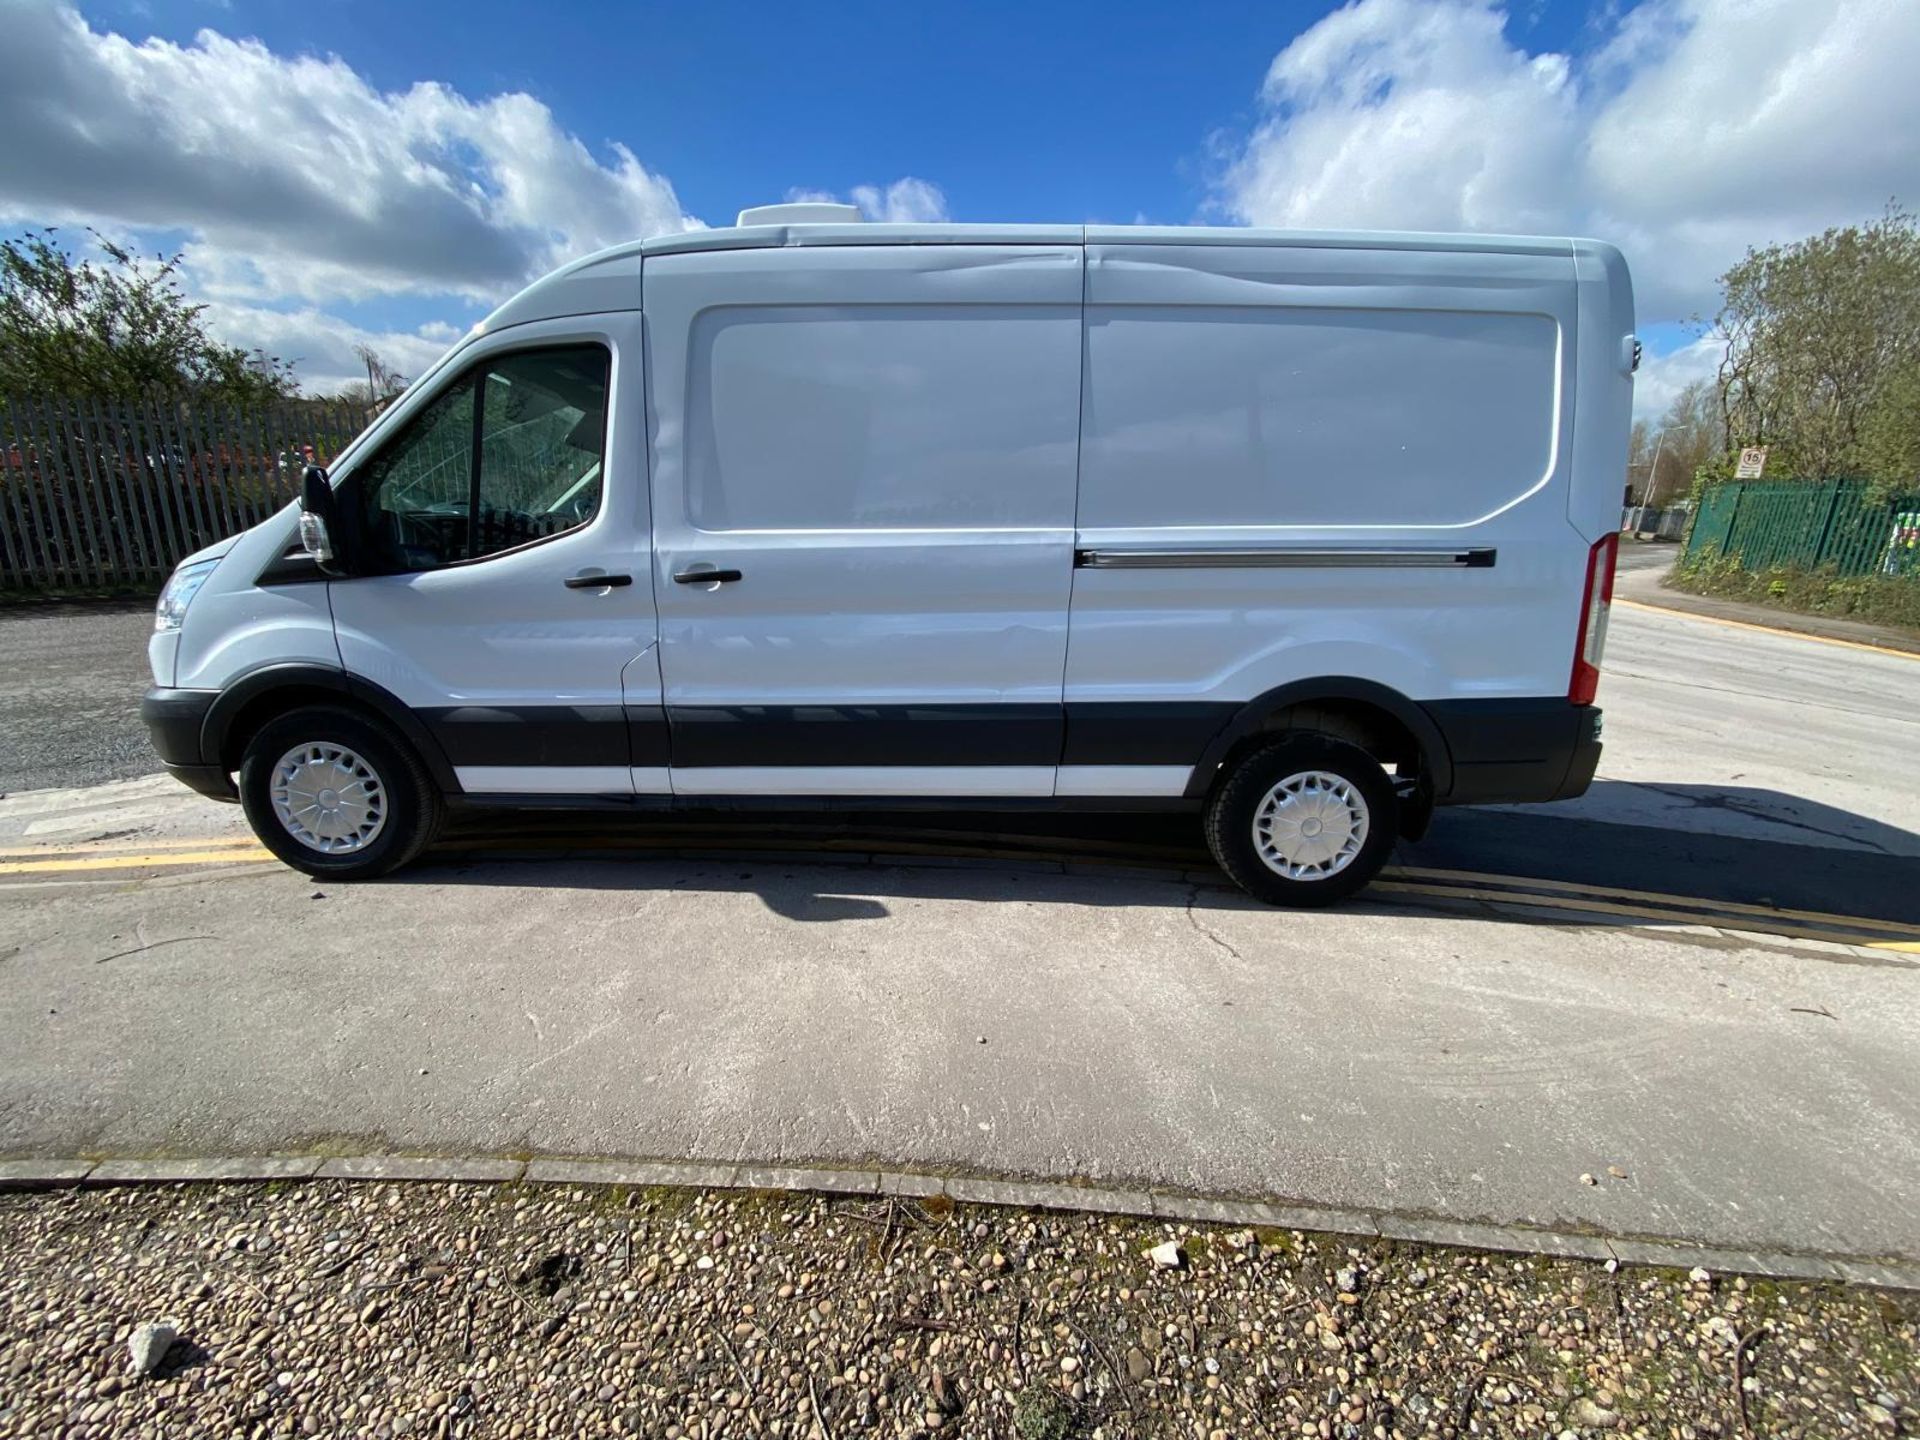 ICY EXPRESS: 2016 FORD TRANSIT REFRIGERATION EDITION >>--NO VAT ON HAMMER--<< - Image 10 of 15